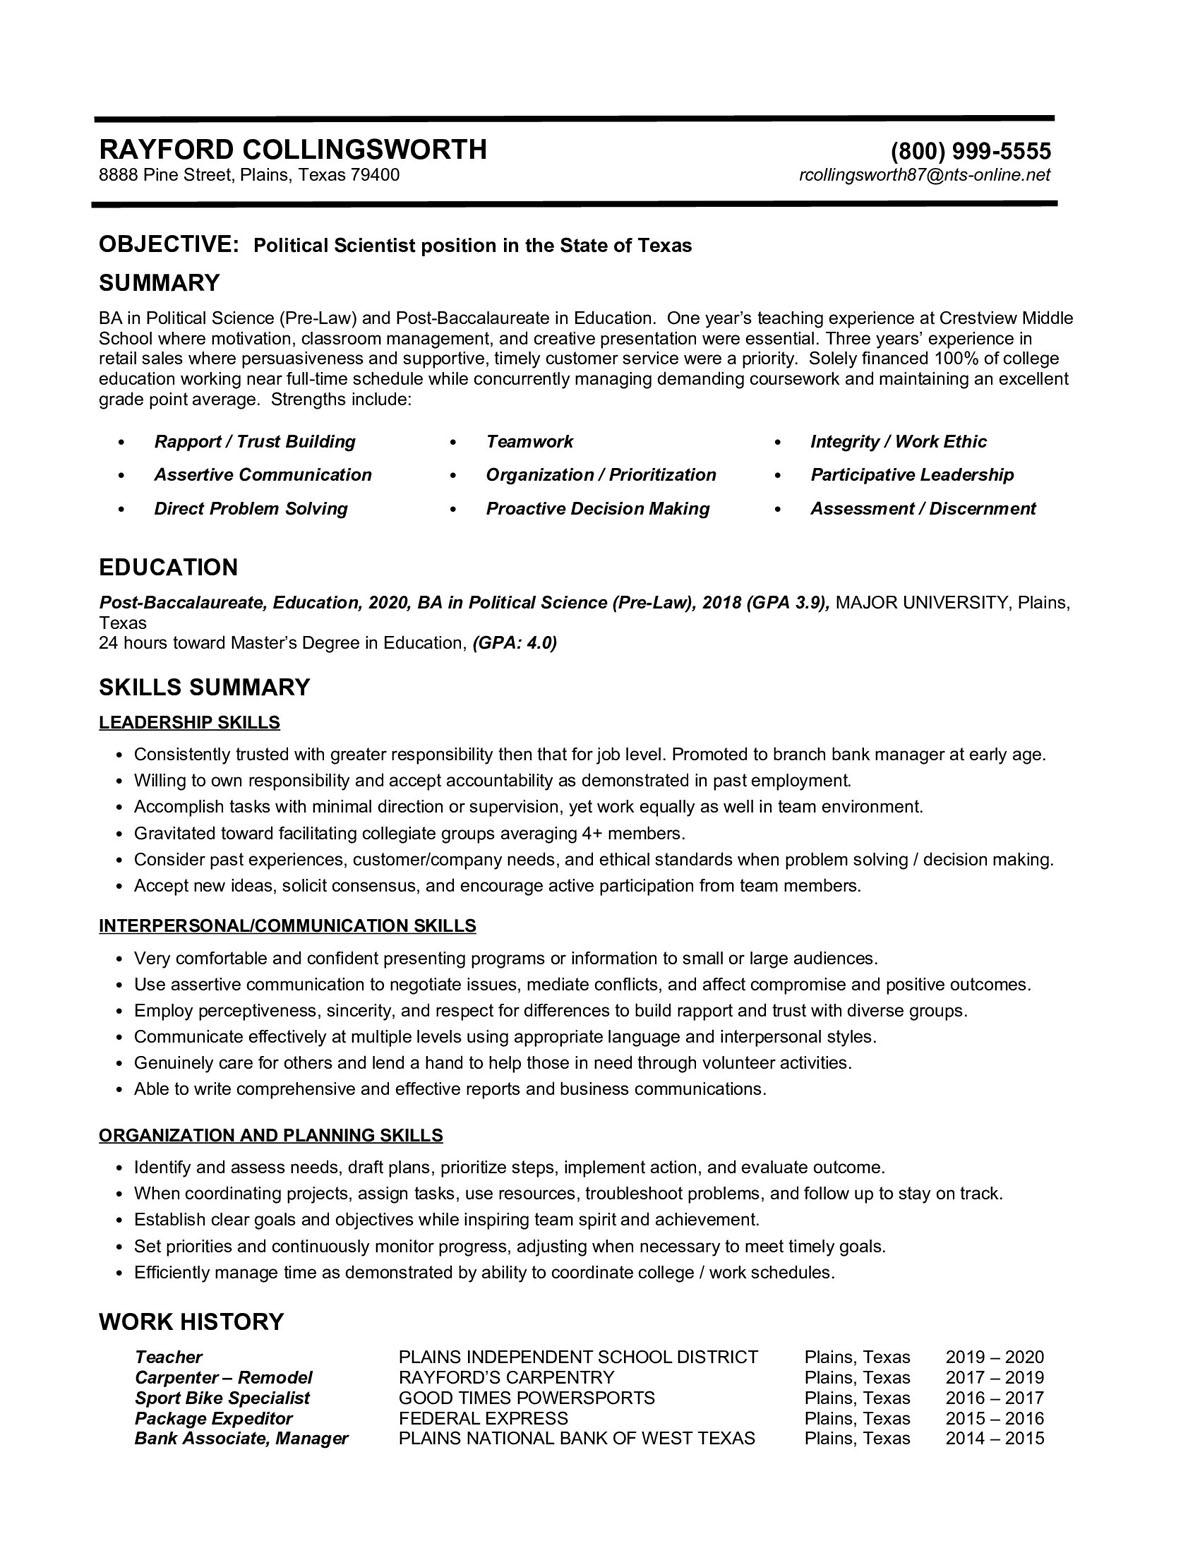 Sample resume: Political Science, Entry Level, Functional